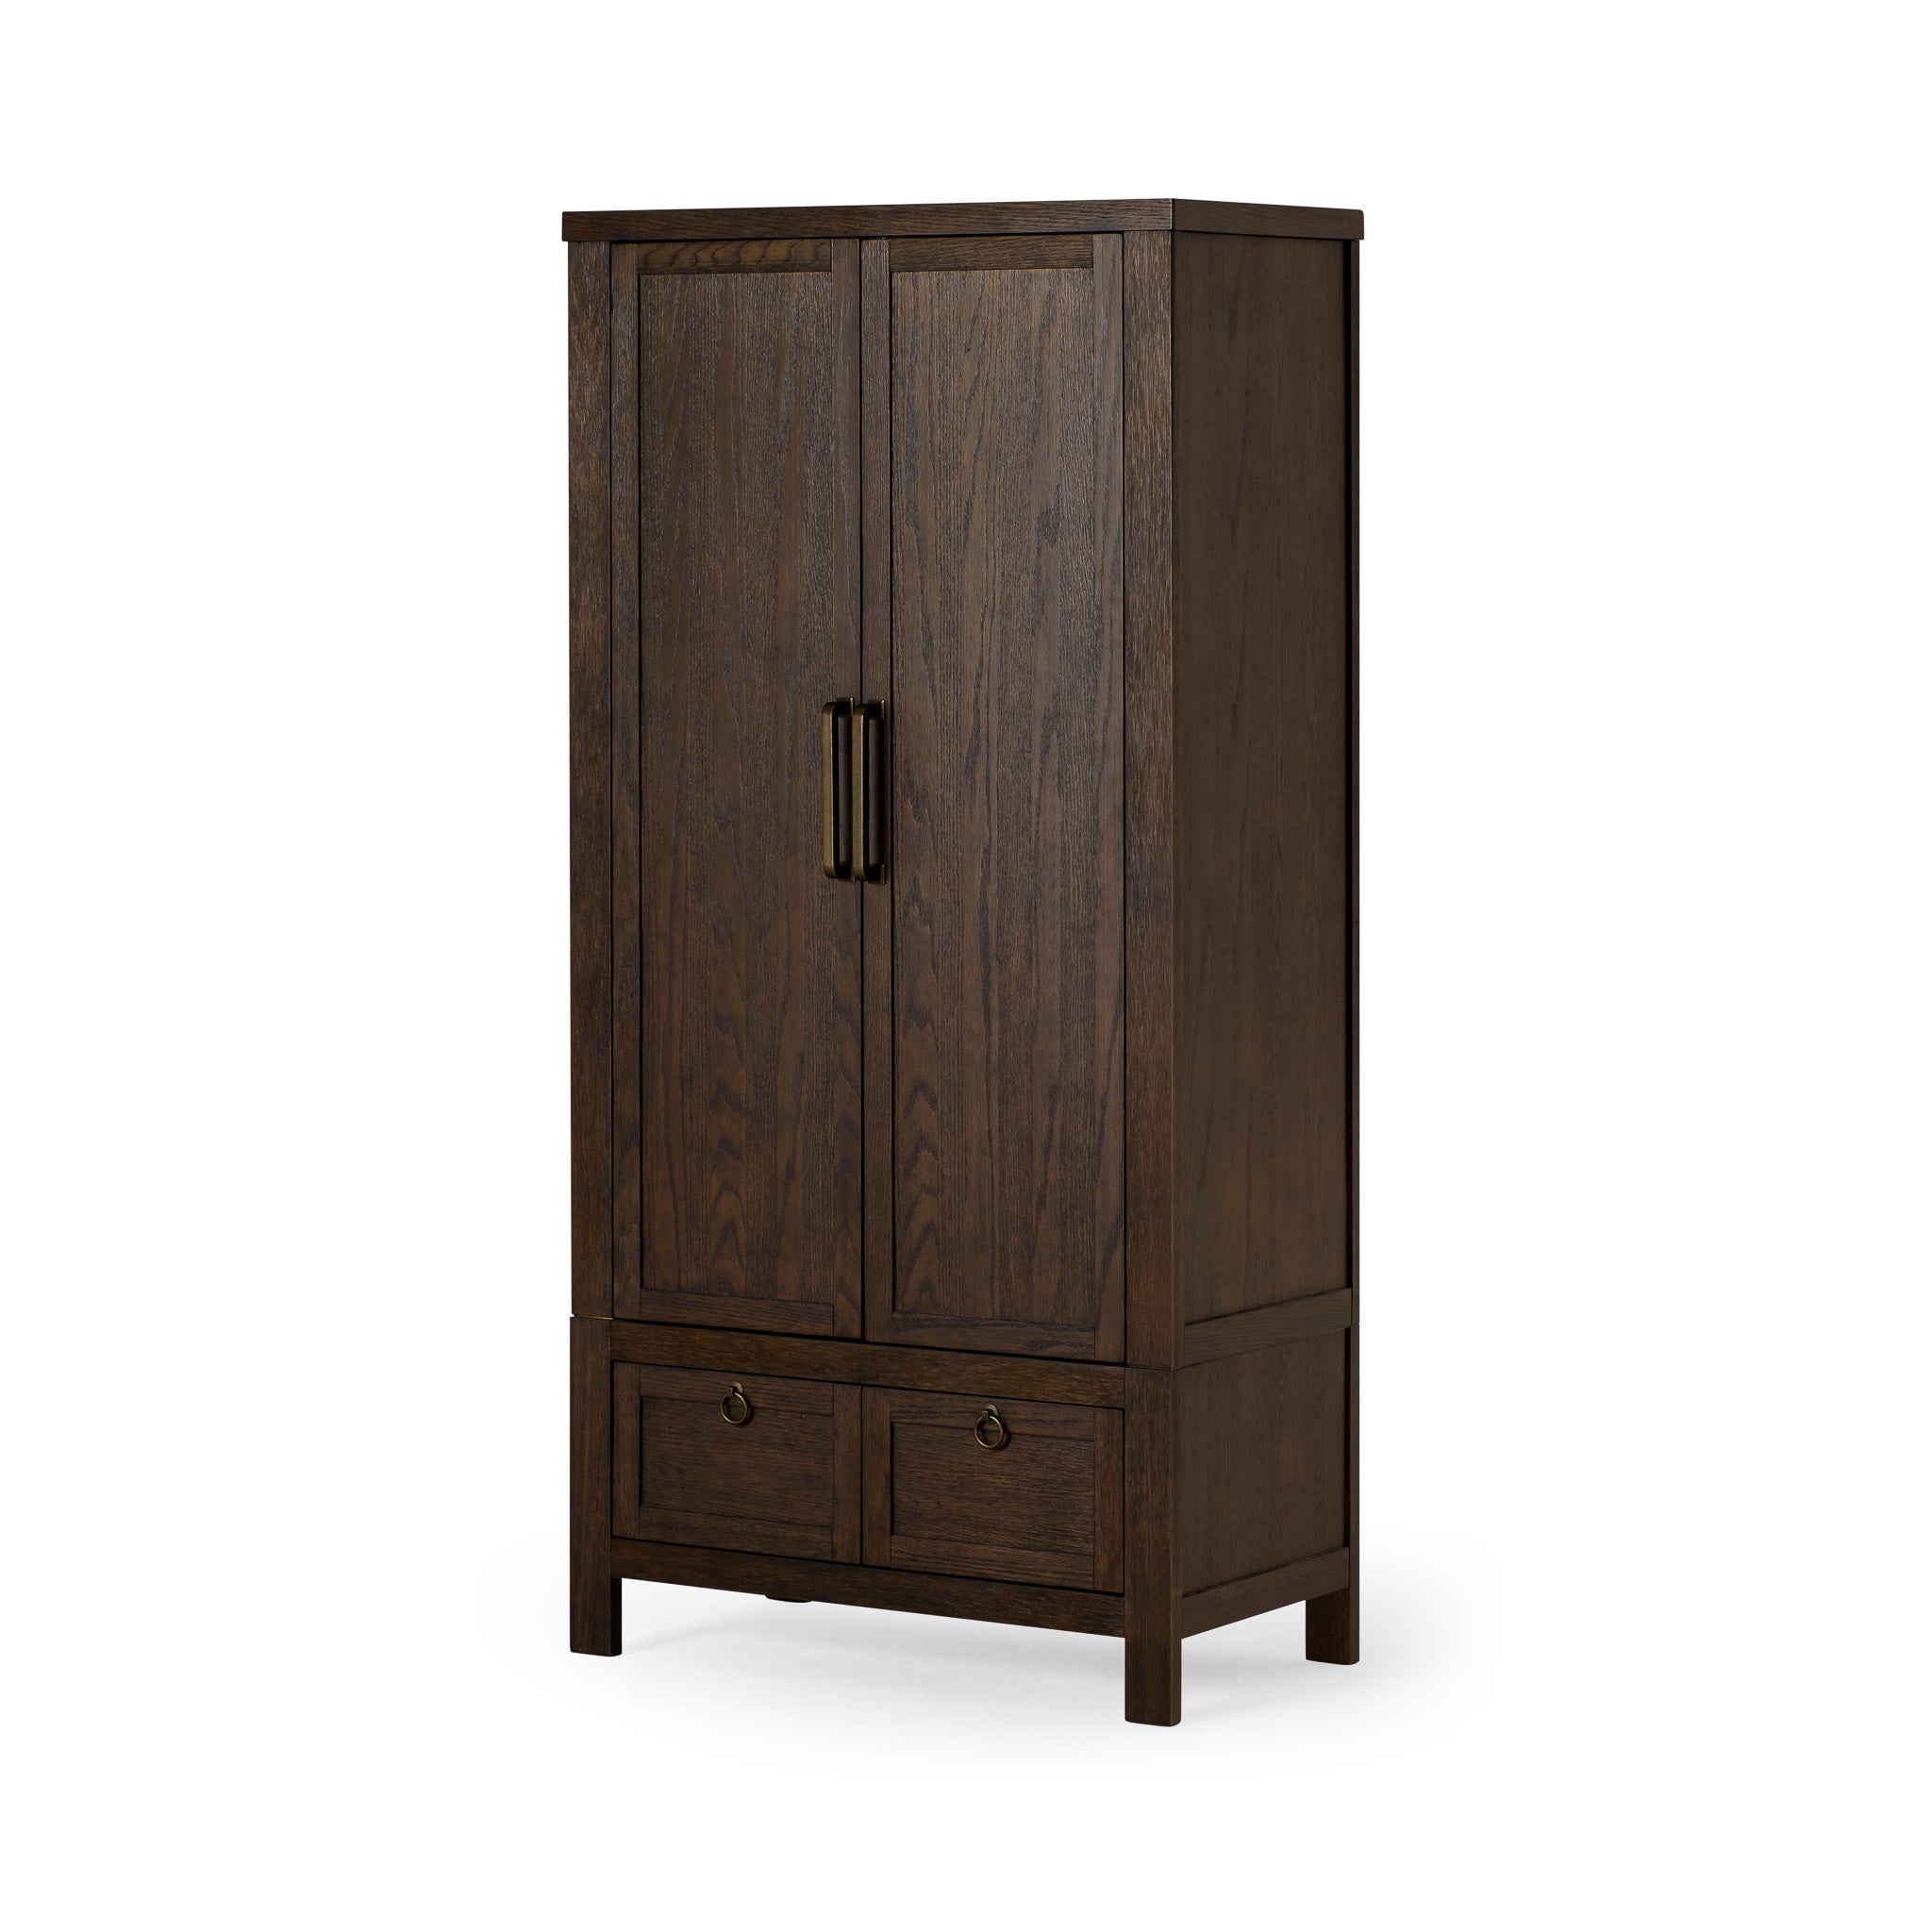 Vaughn Organic Wooden Cabinet in Weathered Brown Finish in Cabinets by Maven Lane